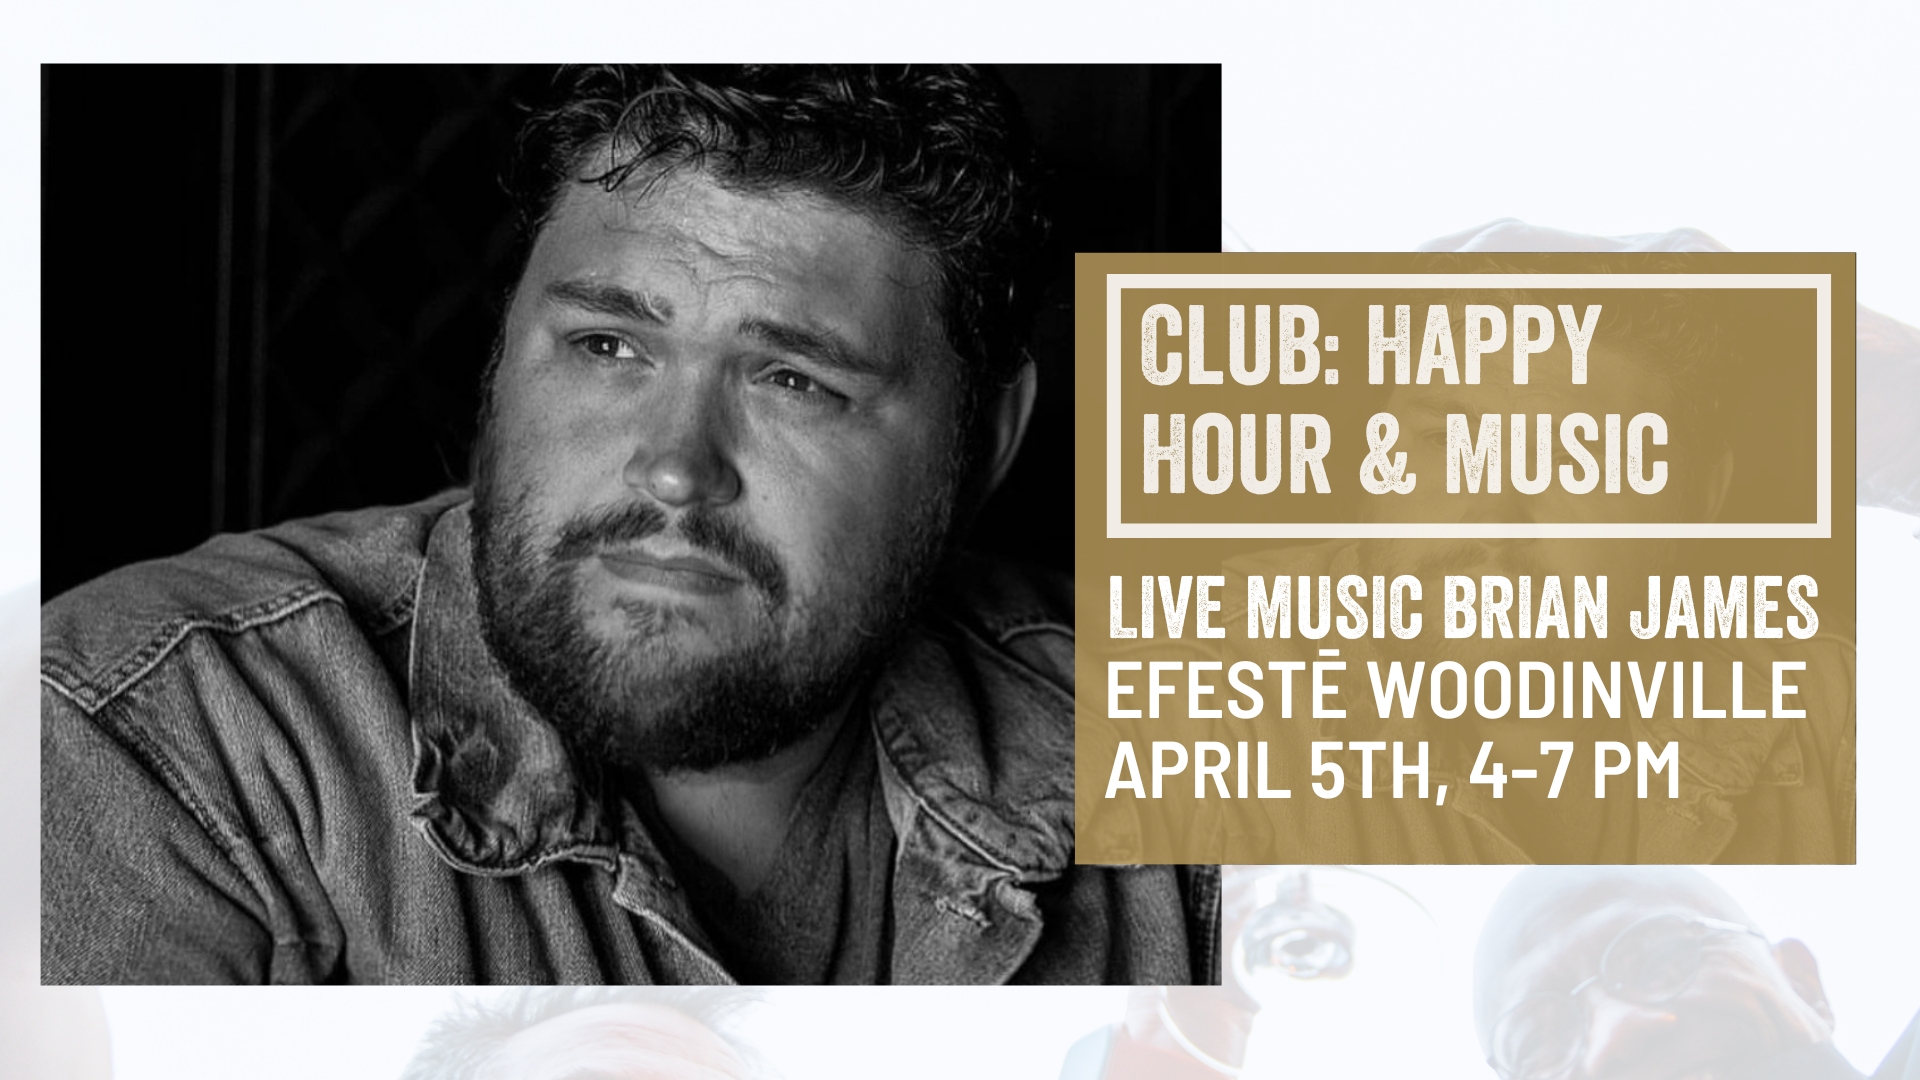 Woodinville Club Event: Live Music with Brian James